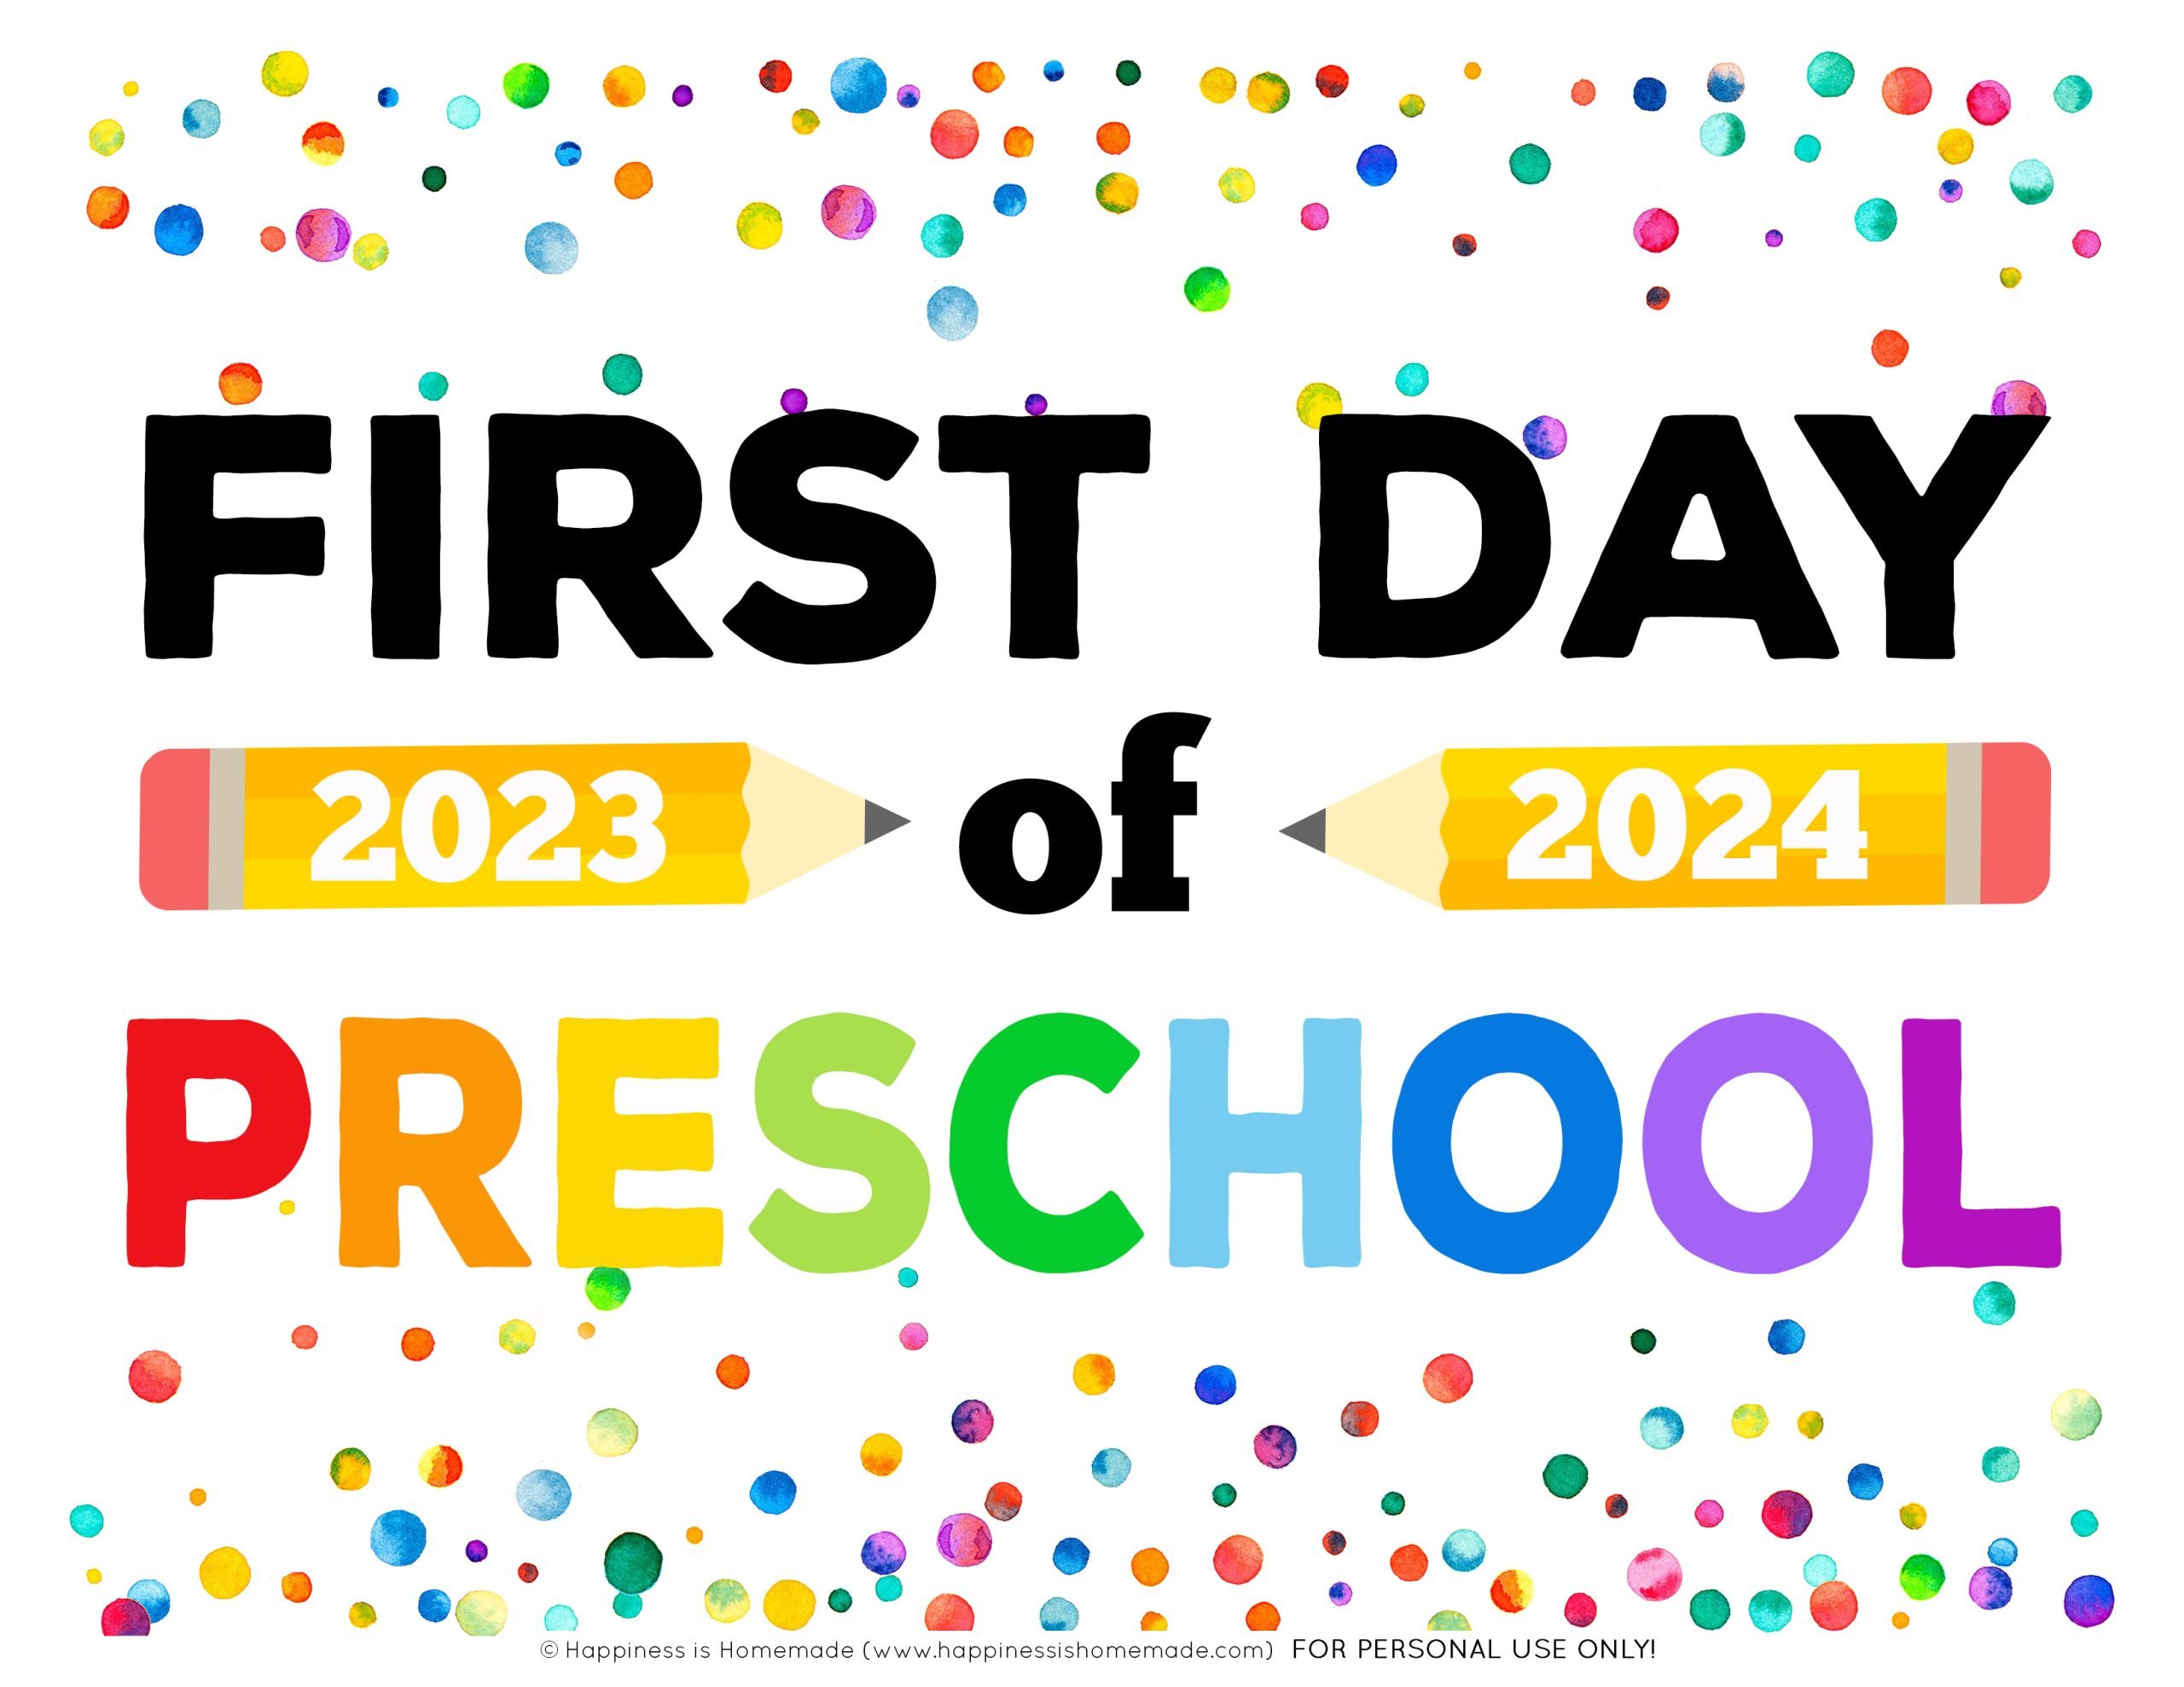 Graphic of Free Printable First Day of Preschool sign 2023 - 2024